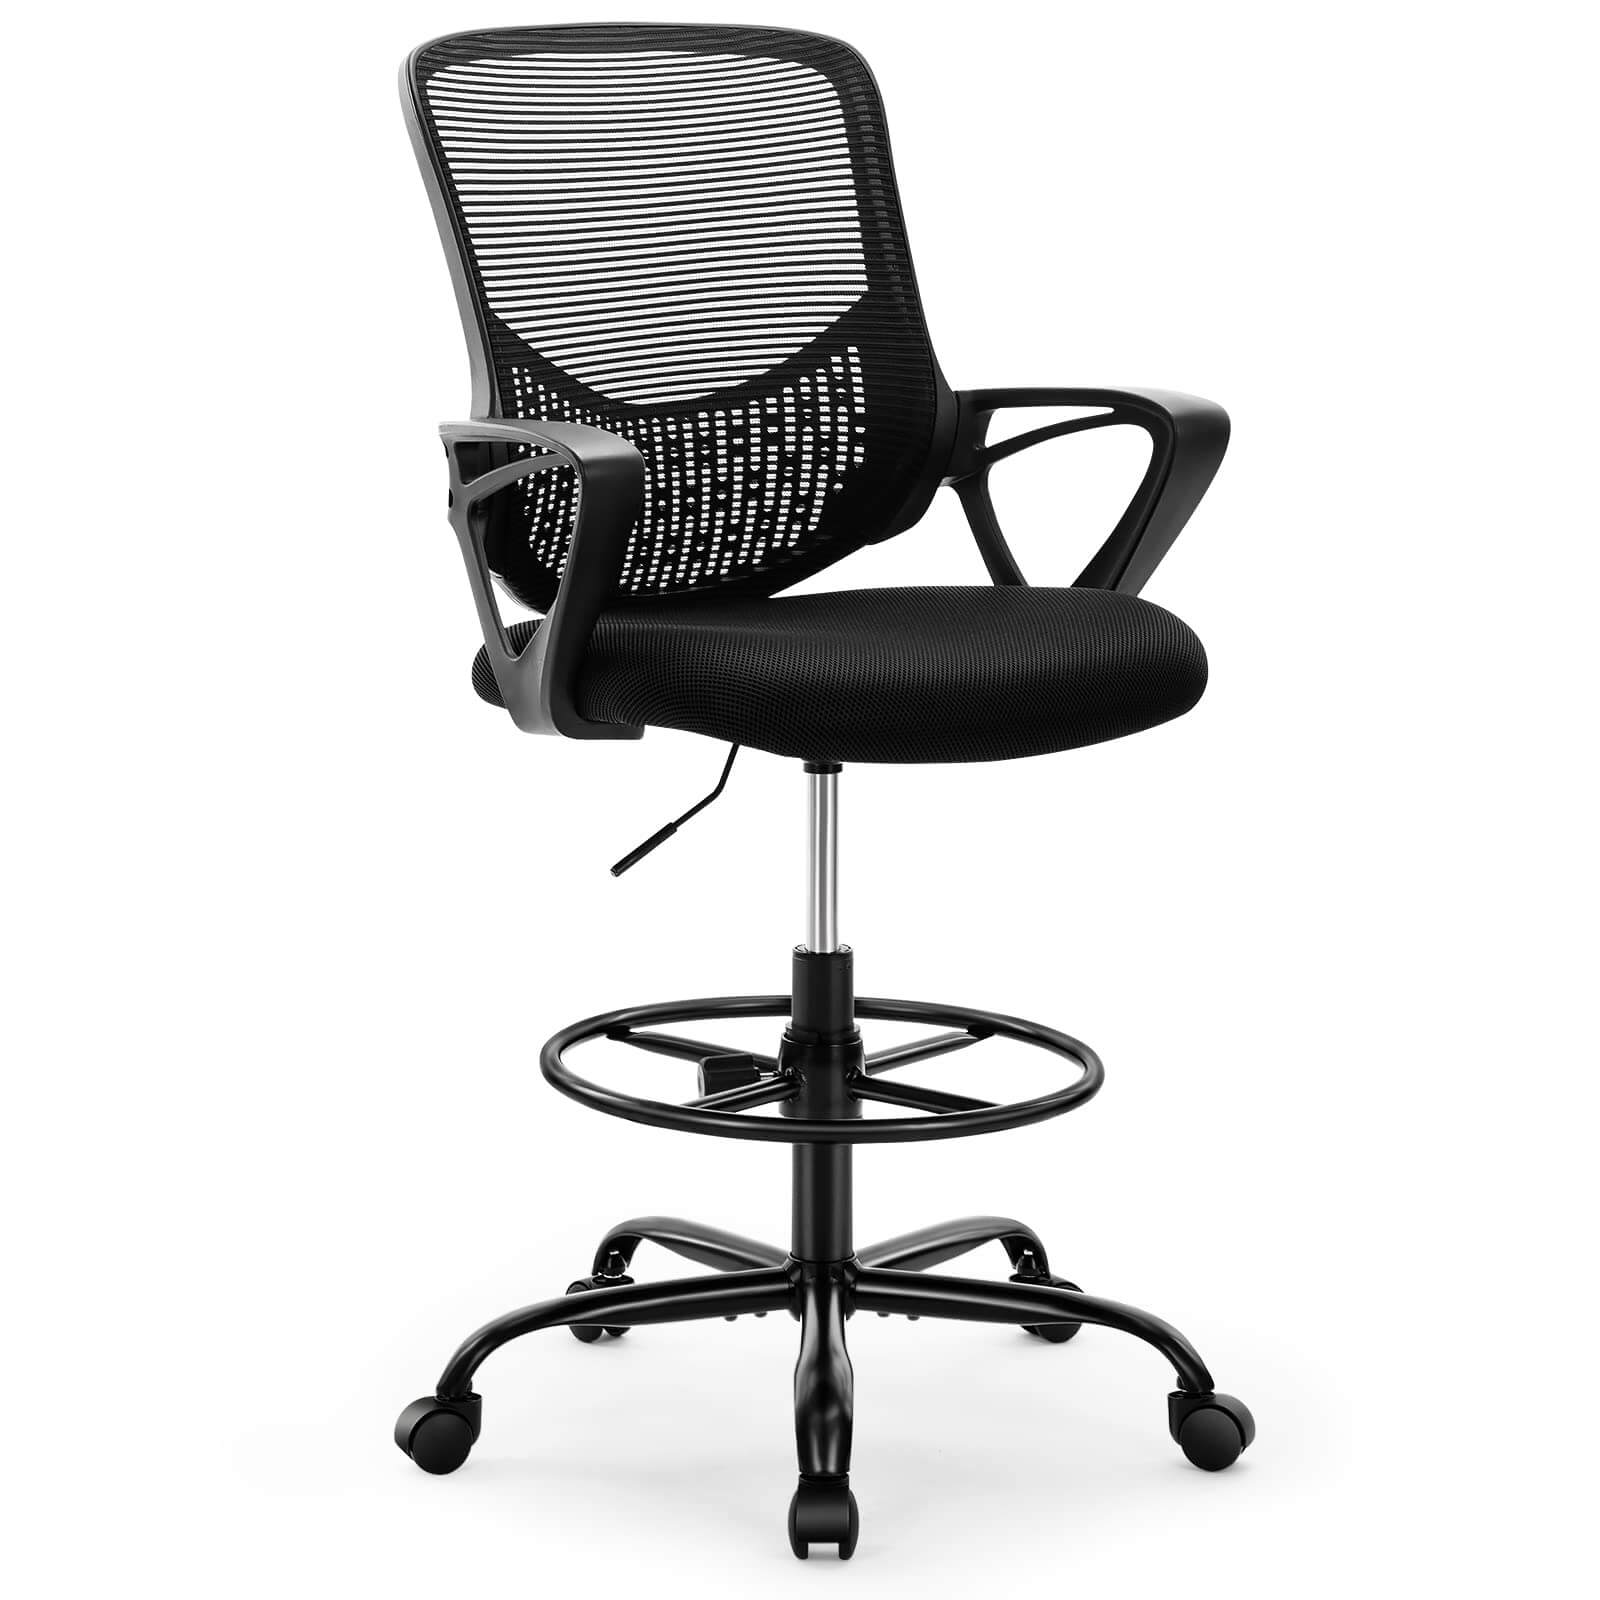  Qulomvs Mesh Ergonomic Office Chair with Footrest Home Office  Desk Chair with Headrest and Backrest 90-135 Adjustable Computer Desk Chair  with Wheels 360 Swivel Task Chair(Pure White) : Home & Kitchen